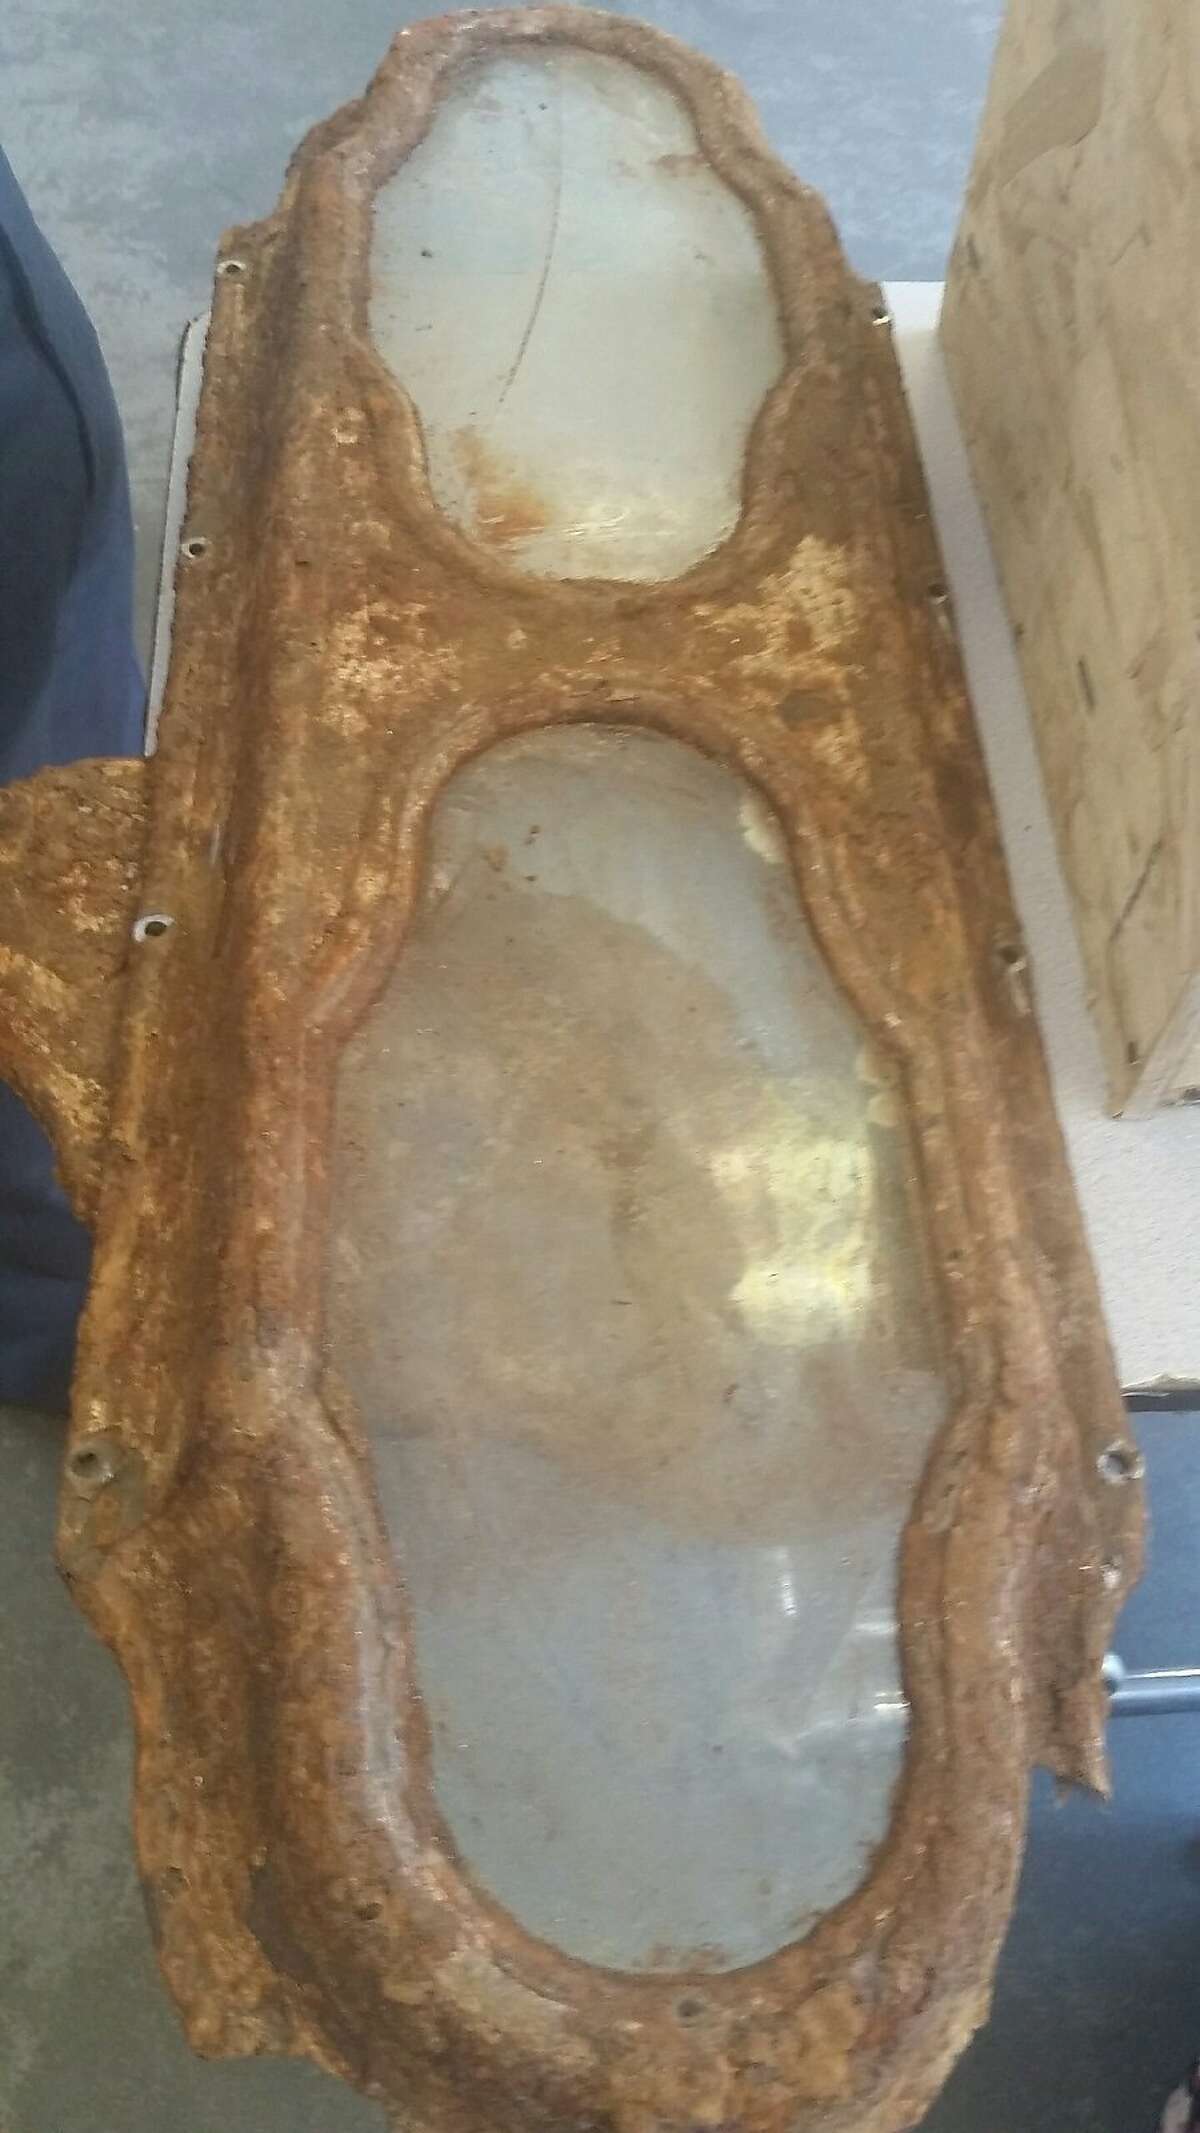 The coffin of a little girl, found buried beneath a San Francisco home.